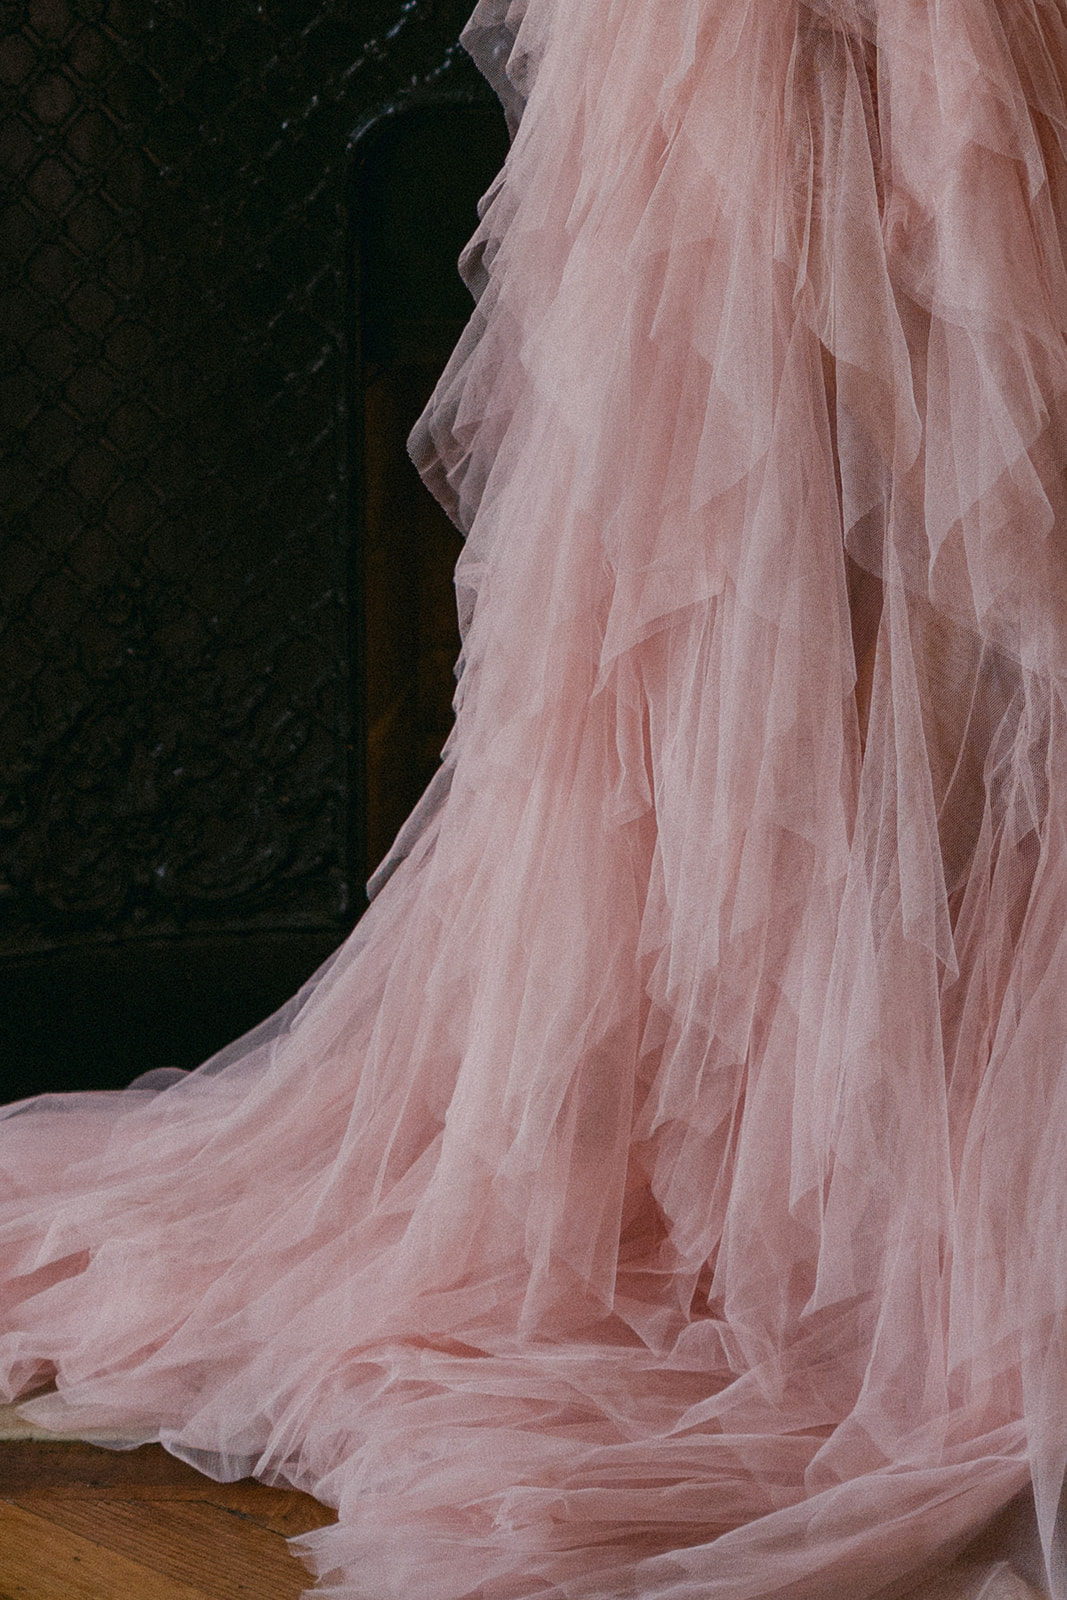 Close up detail of pink tulle dress